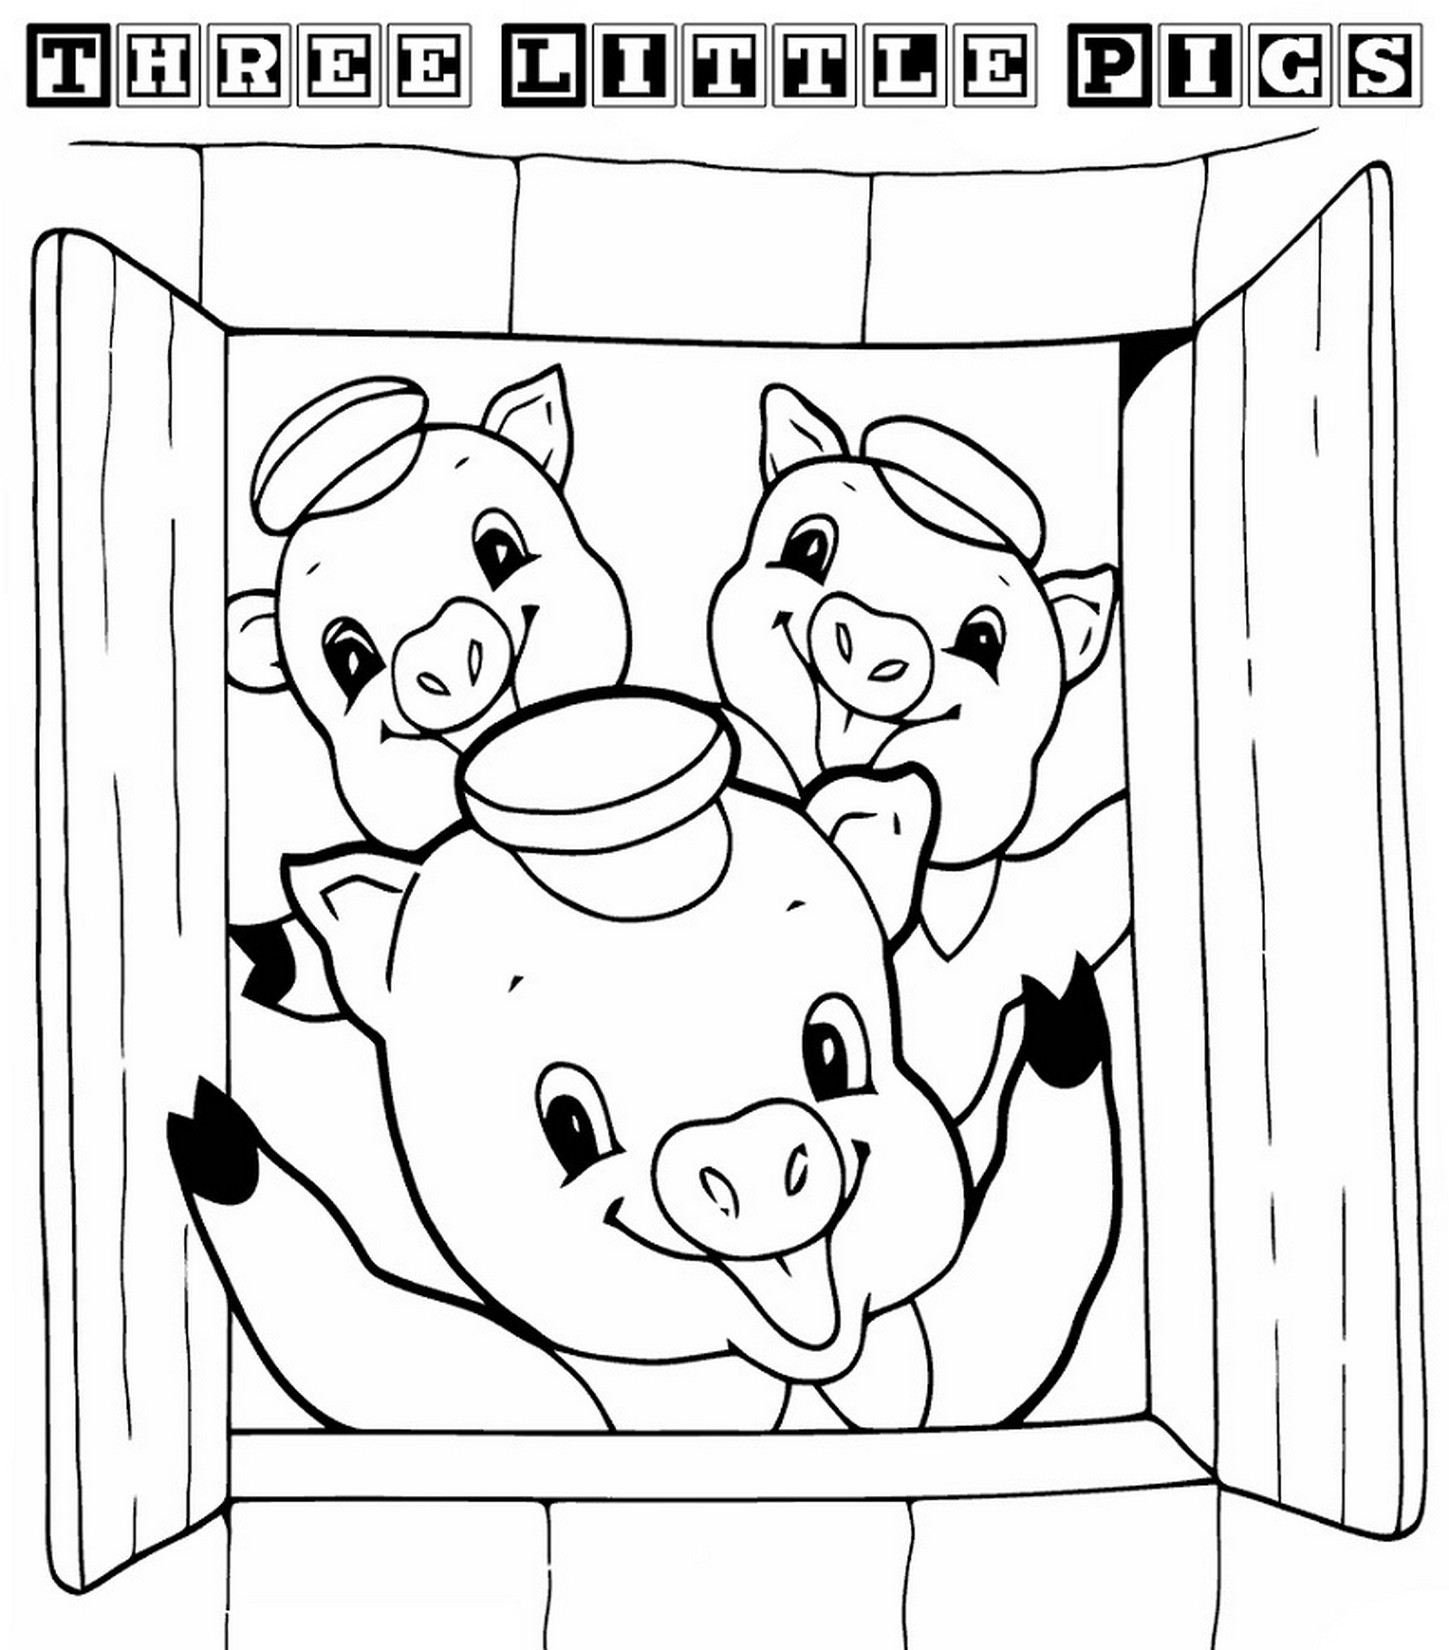 Preschool Coloring Sheets For The 3 Little Pigs Wolf
 Three Little Pigs Coloring Pages for Preschool